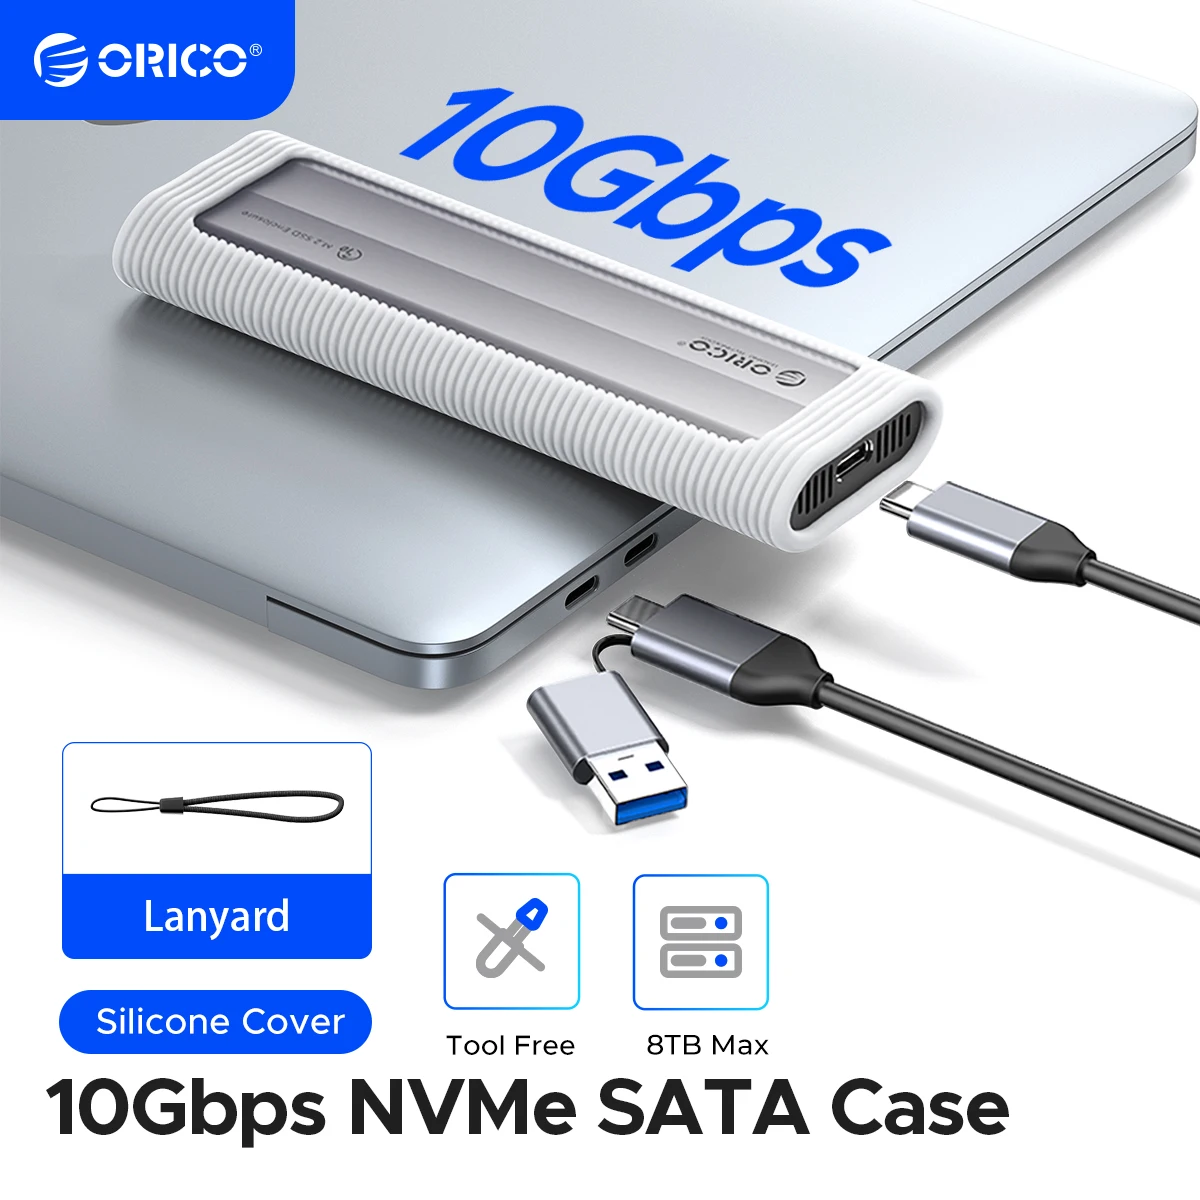 

ORICO M.2 NVMe SATA SSD Enclosure Tool-Free USB External 10Gbps M.2 NVMe to USB Adapter Support UASP for PCIe NVMe and SATA SSD